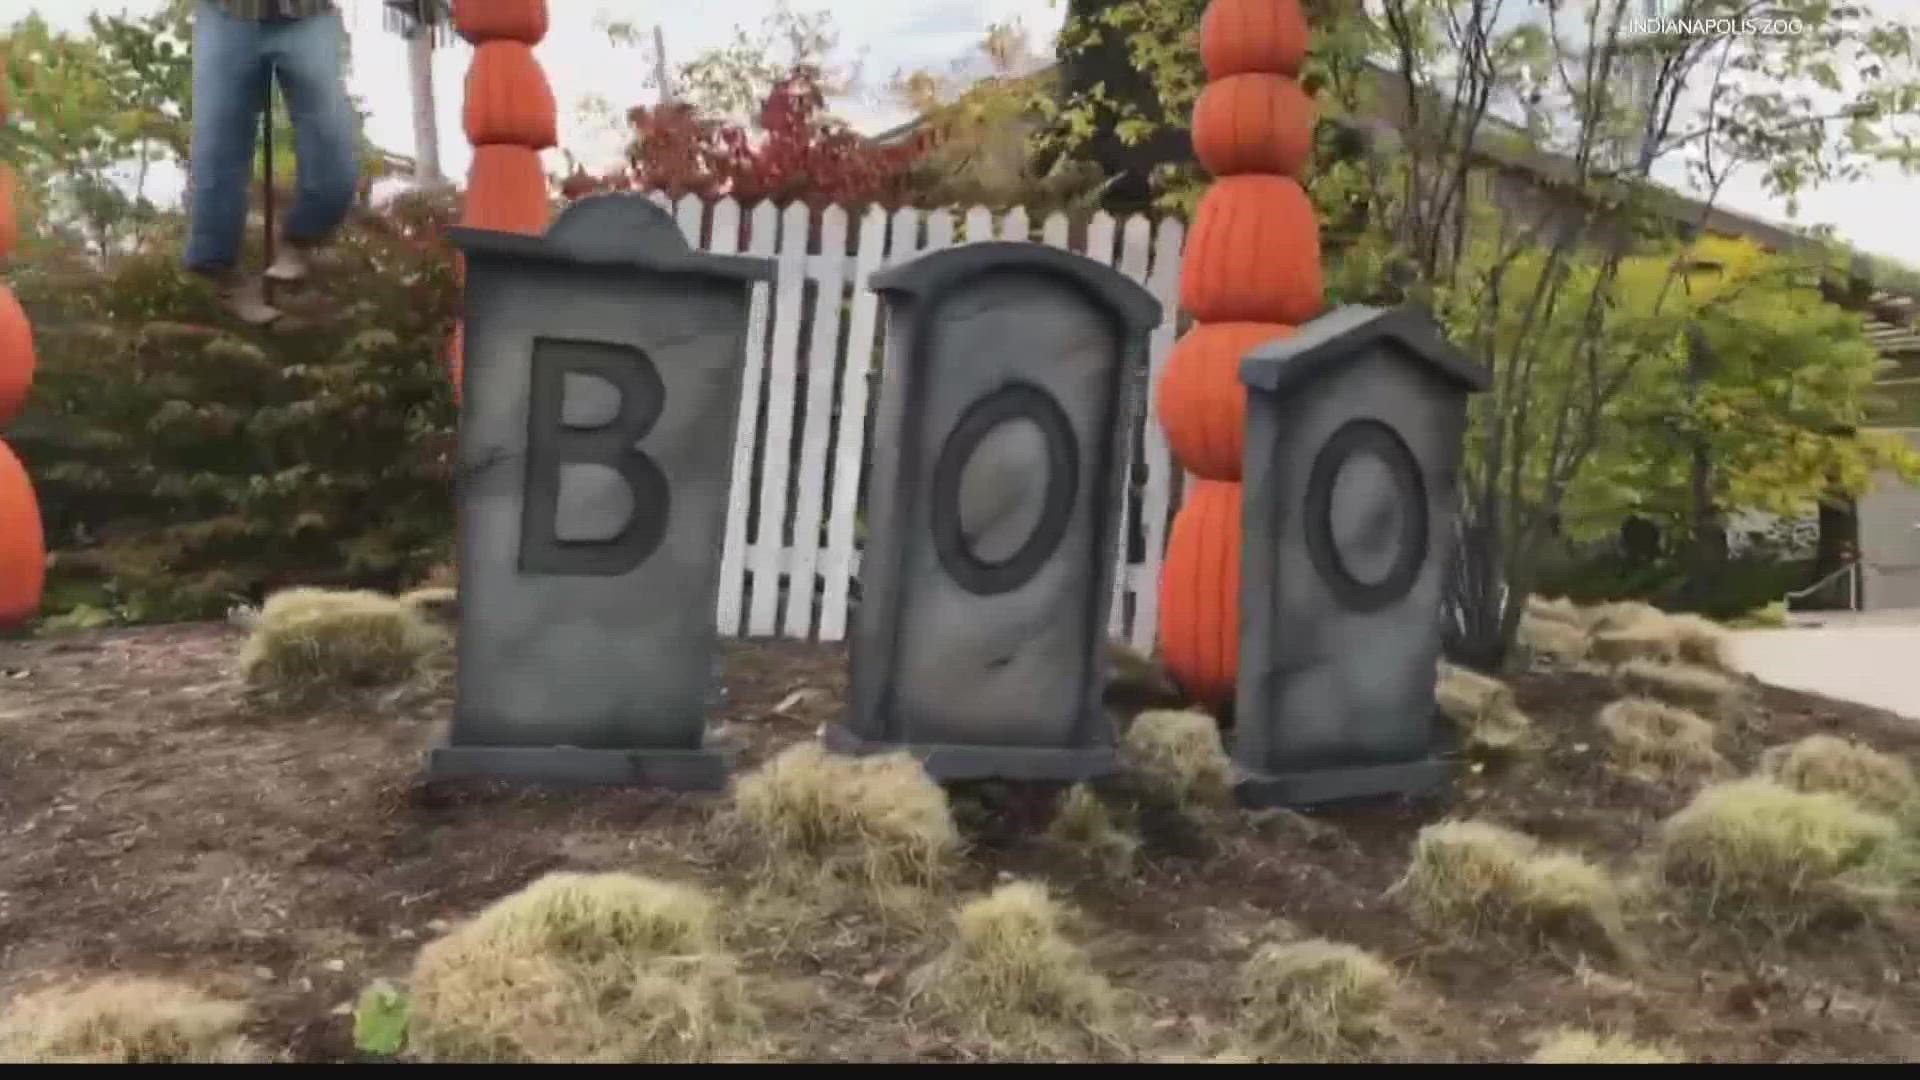 The Indianapolis Zoo has Halloween activities, a live DJ, spooktacular costumes and trick-or-treating.